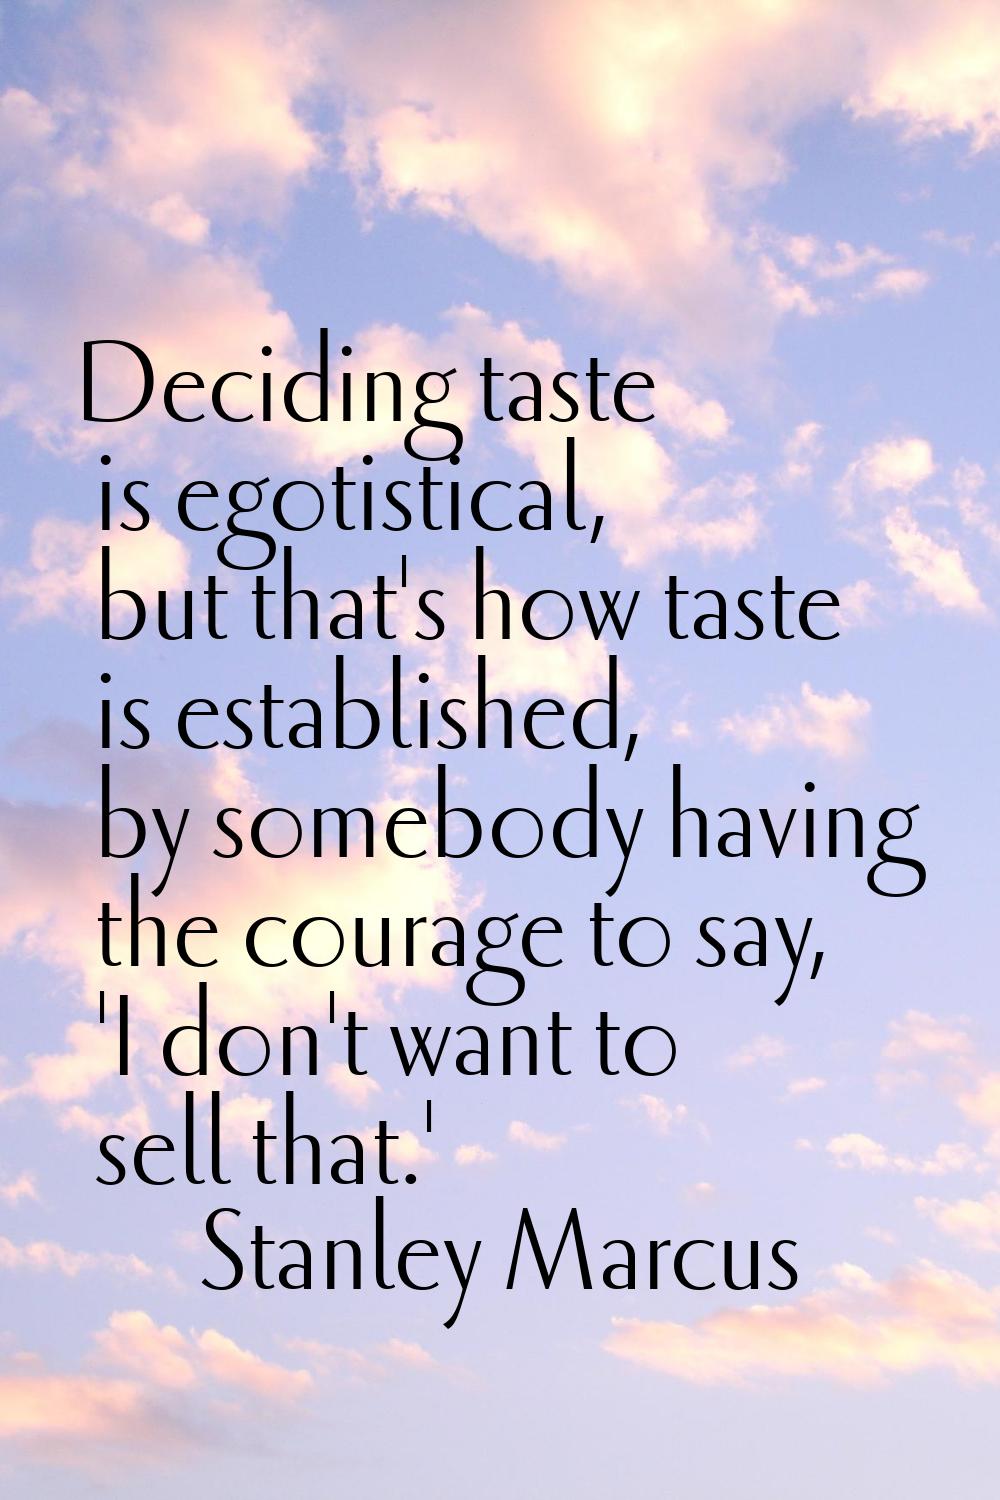 Deciding taste is egotistical, but that's how taste is established, by somebody having the courage 